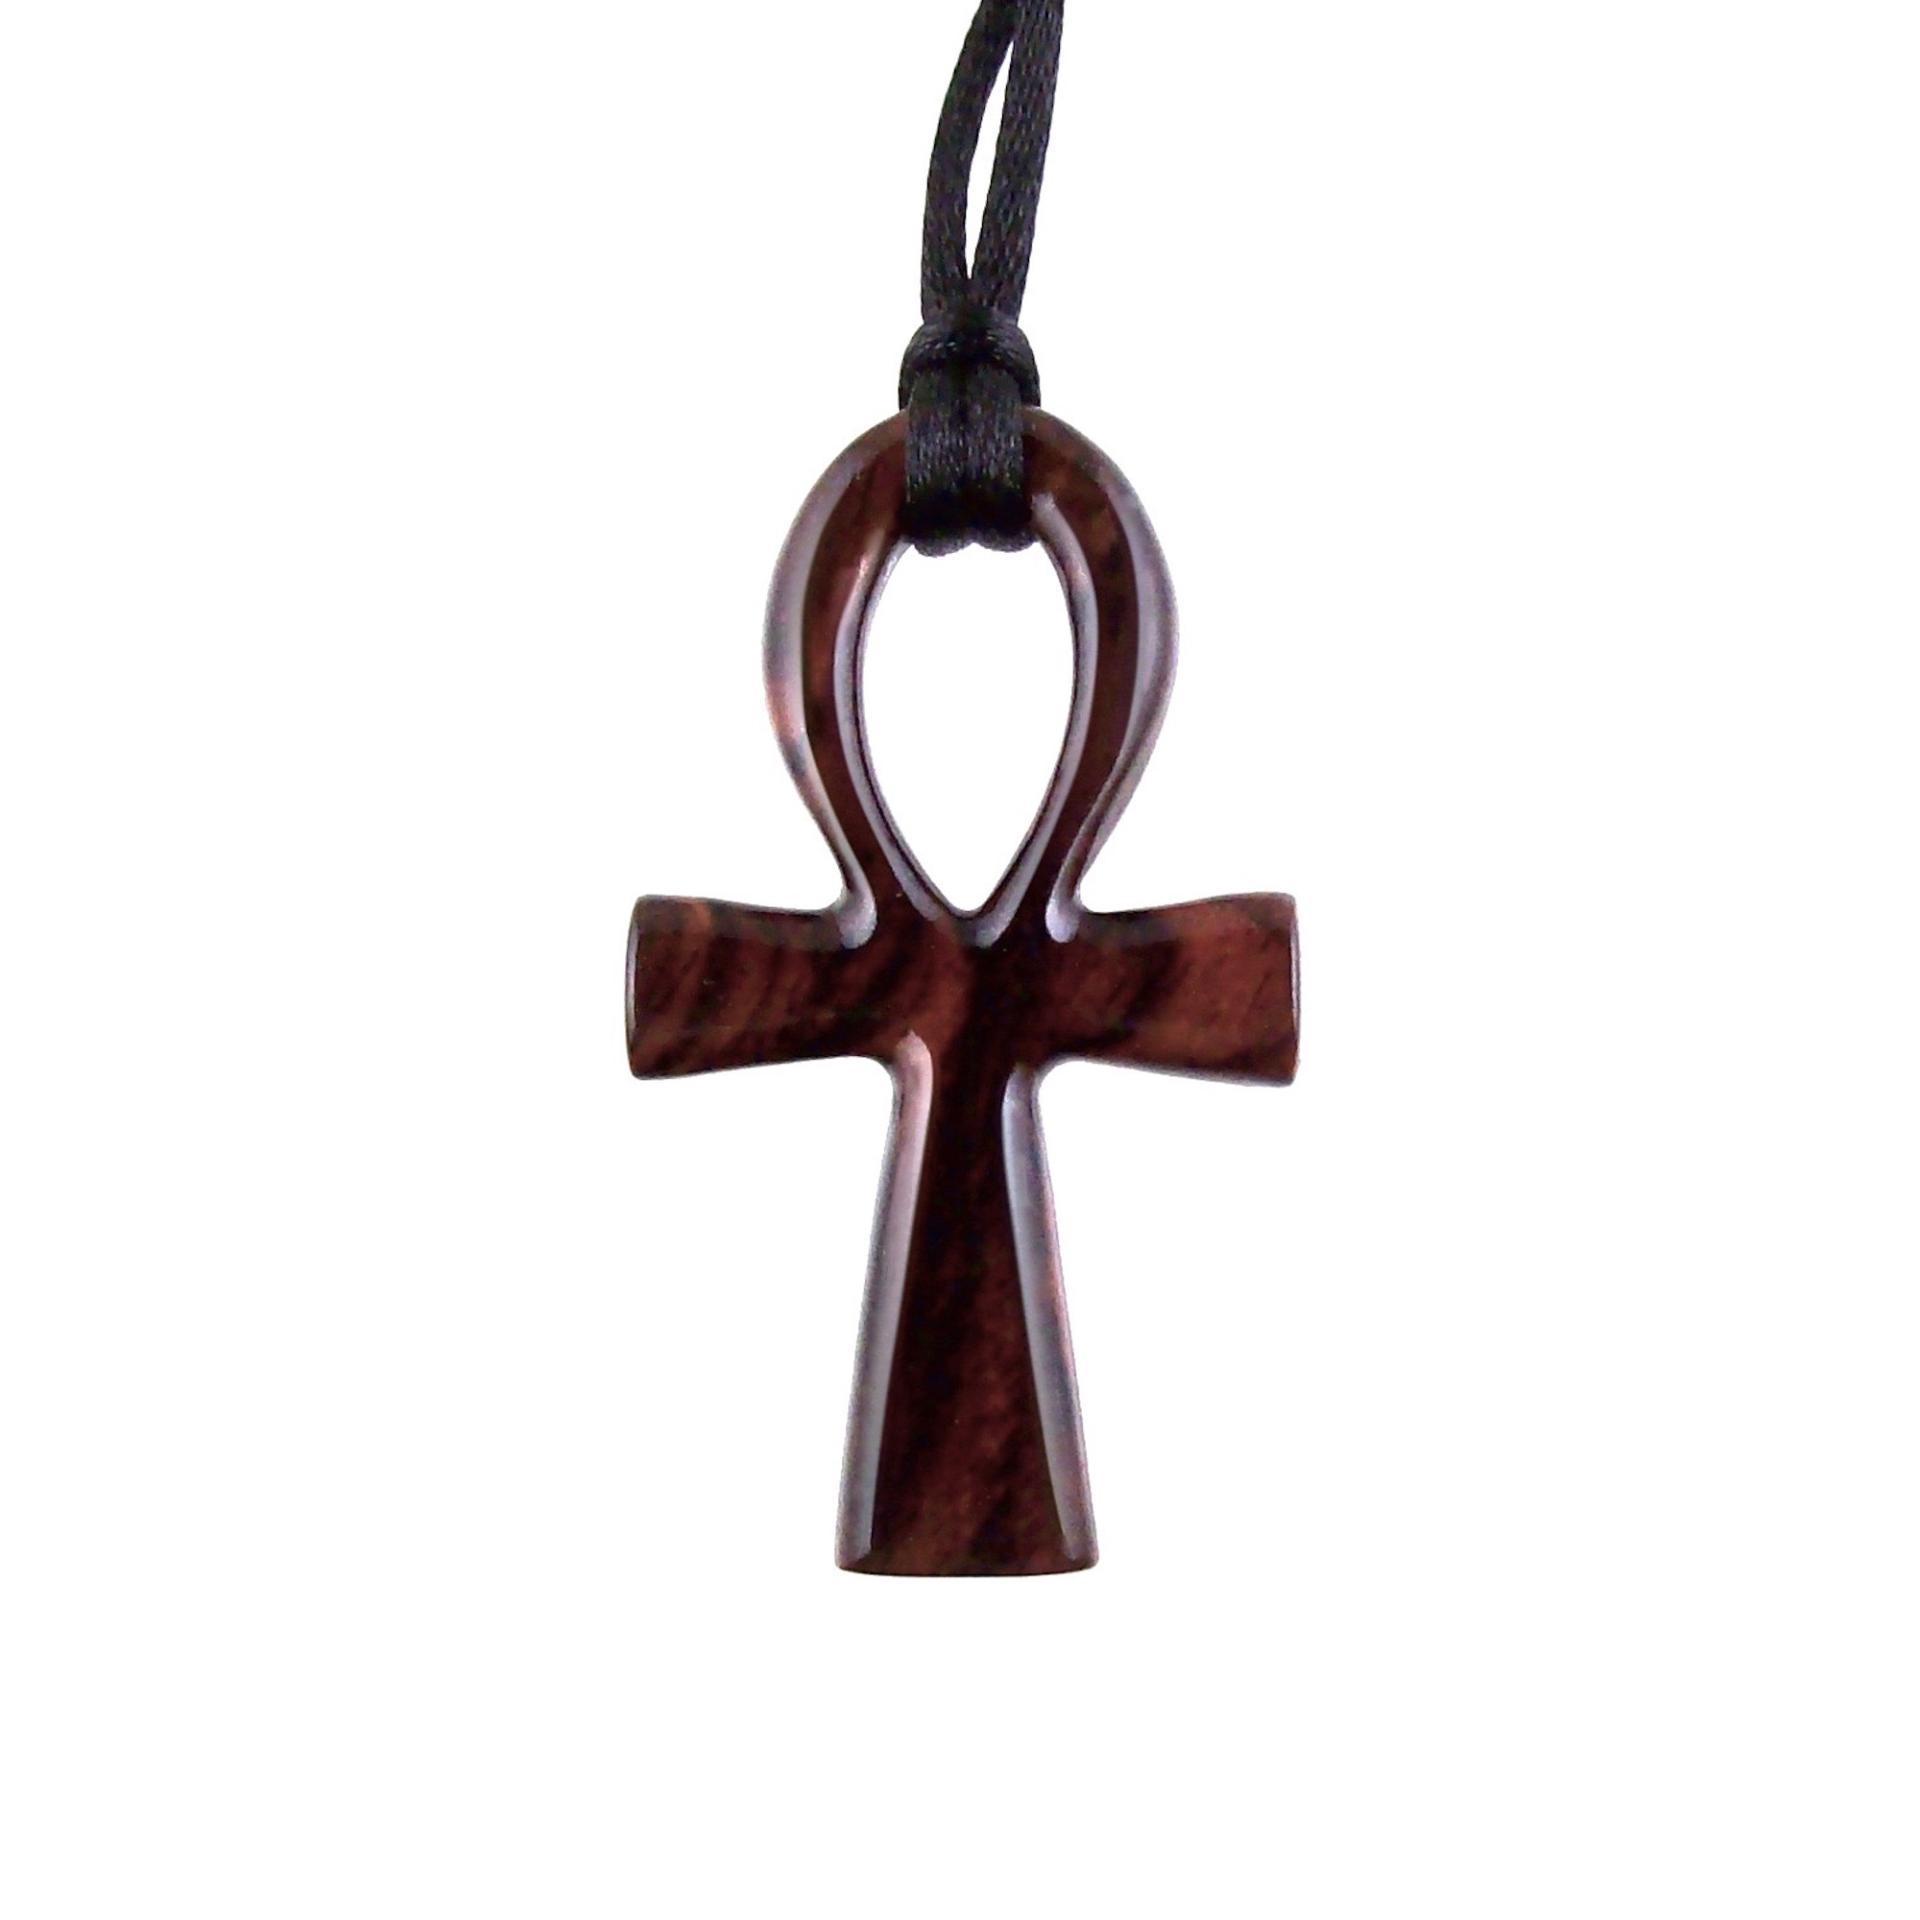 Wooden Ankh Pendant, Hand Carved Egyptian Ankh Cross Necklace for Men or Women, African Wood Jewelry Gift for Him Her